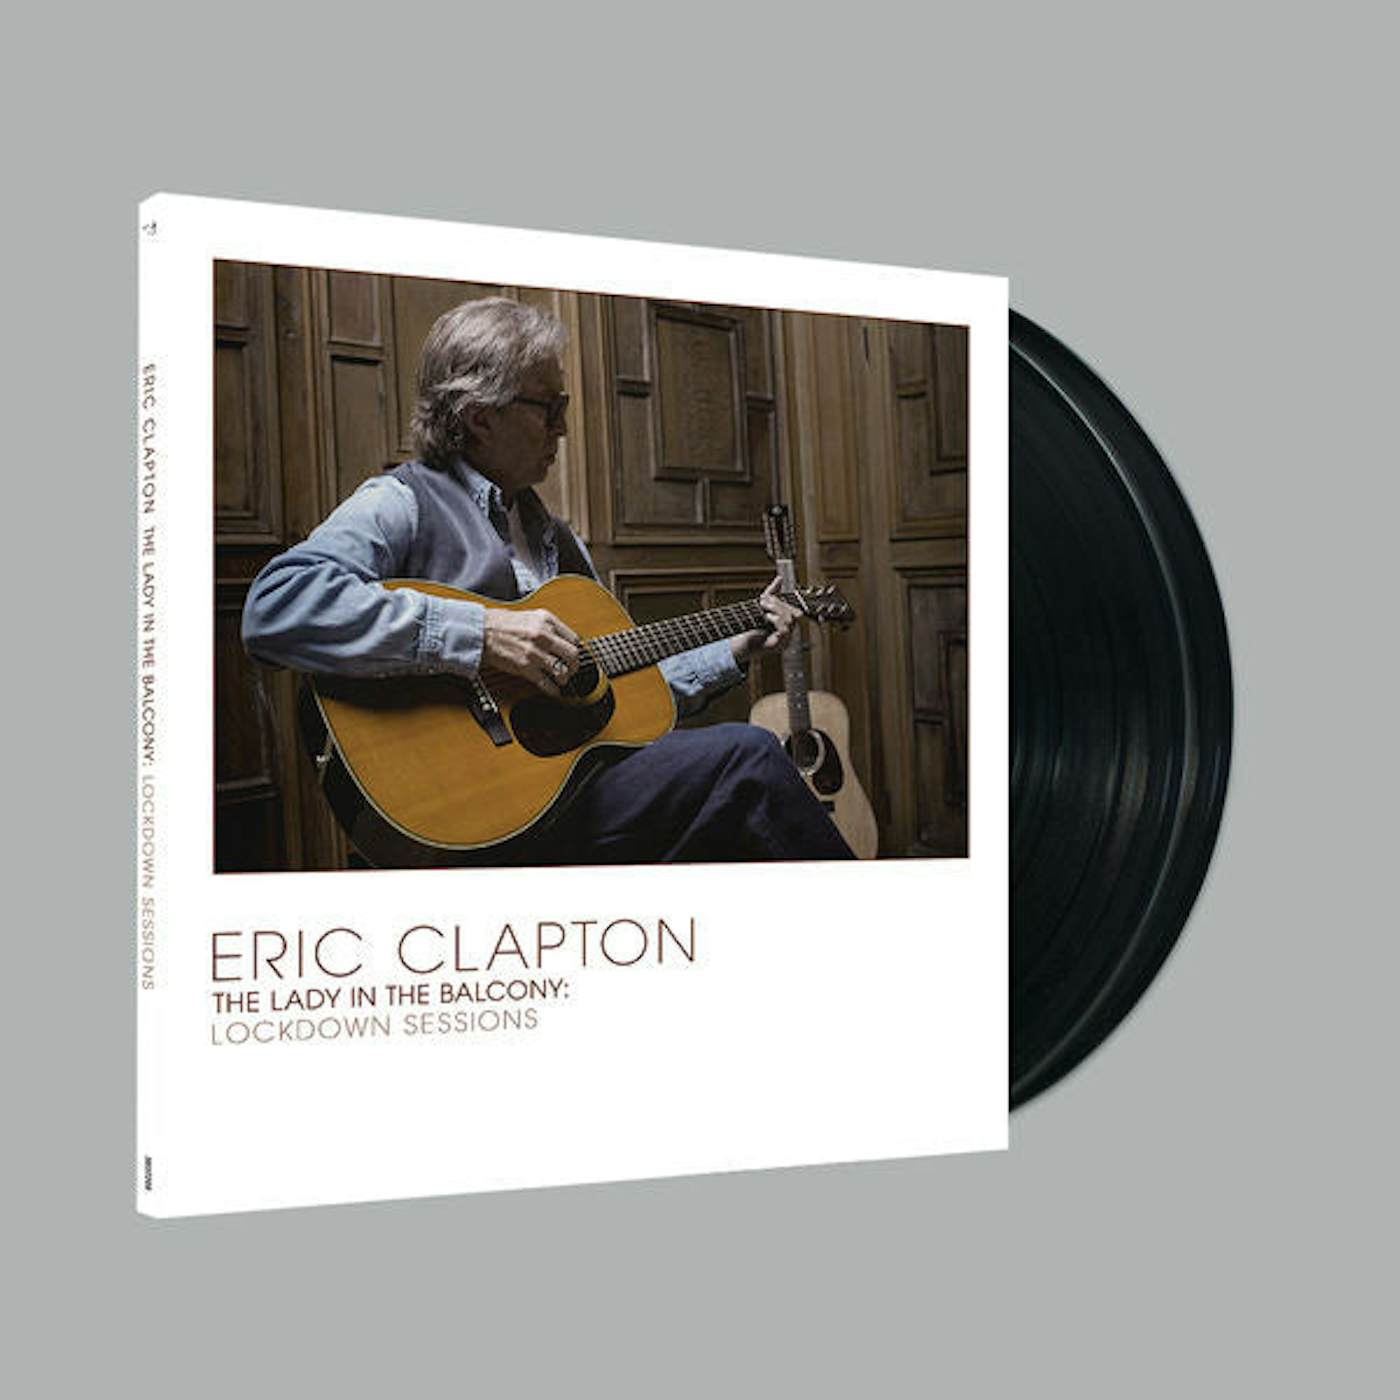 Eric Clapton The Lady In The Balcony: Lockdown Sessions